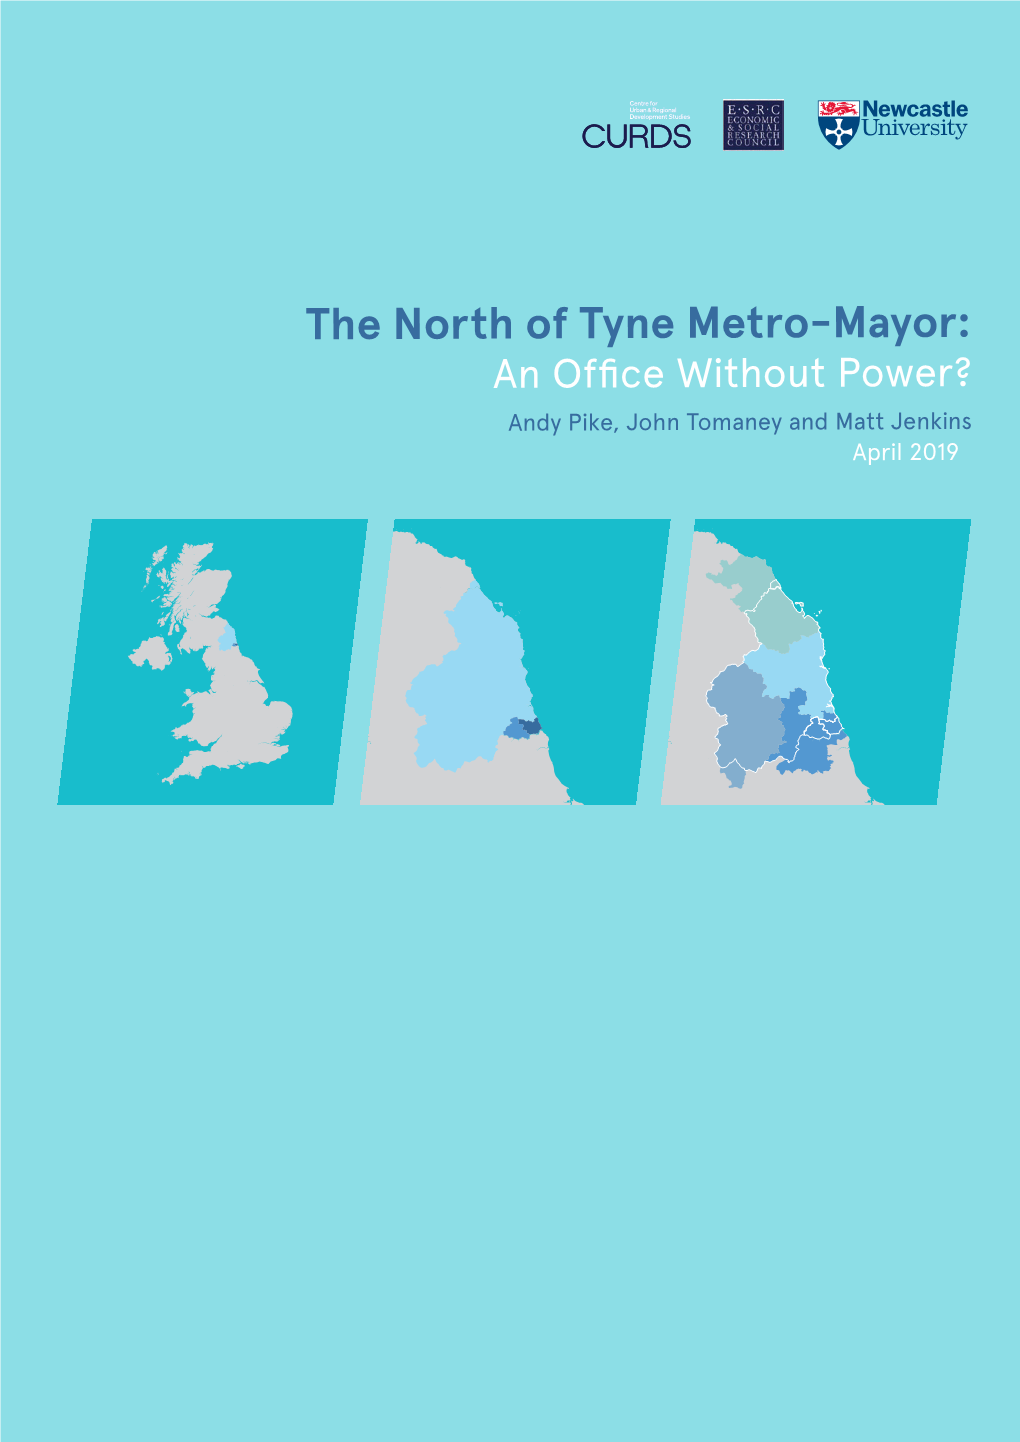 The North of Tyne Metro-Mayor: an Office Without Power?